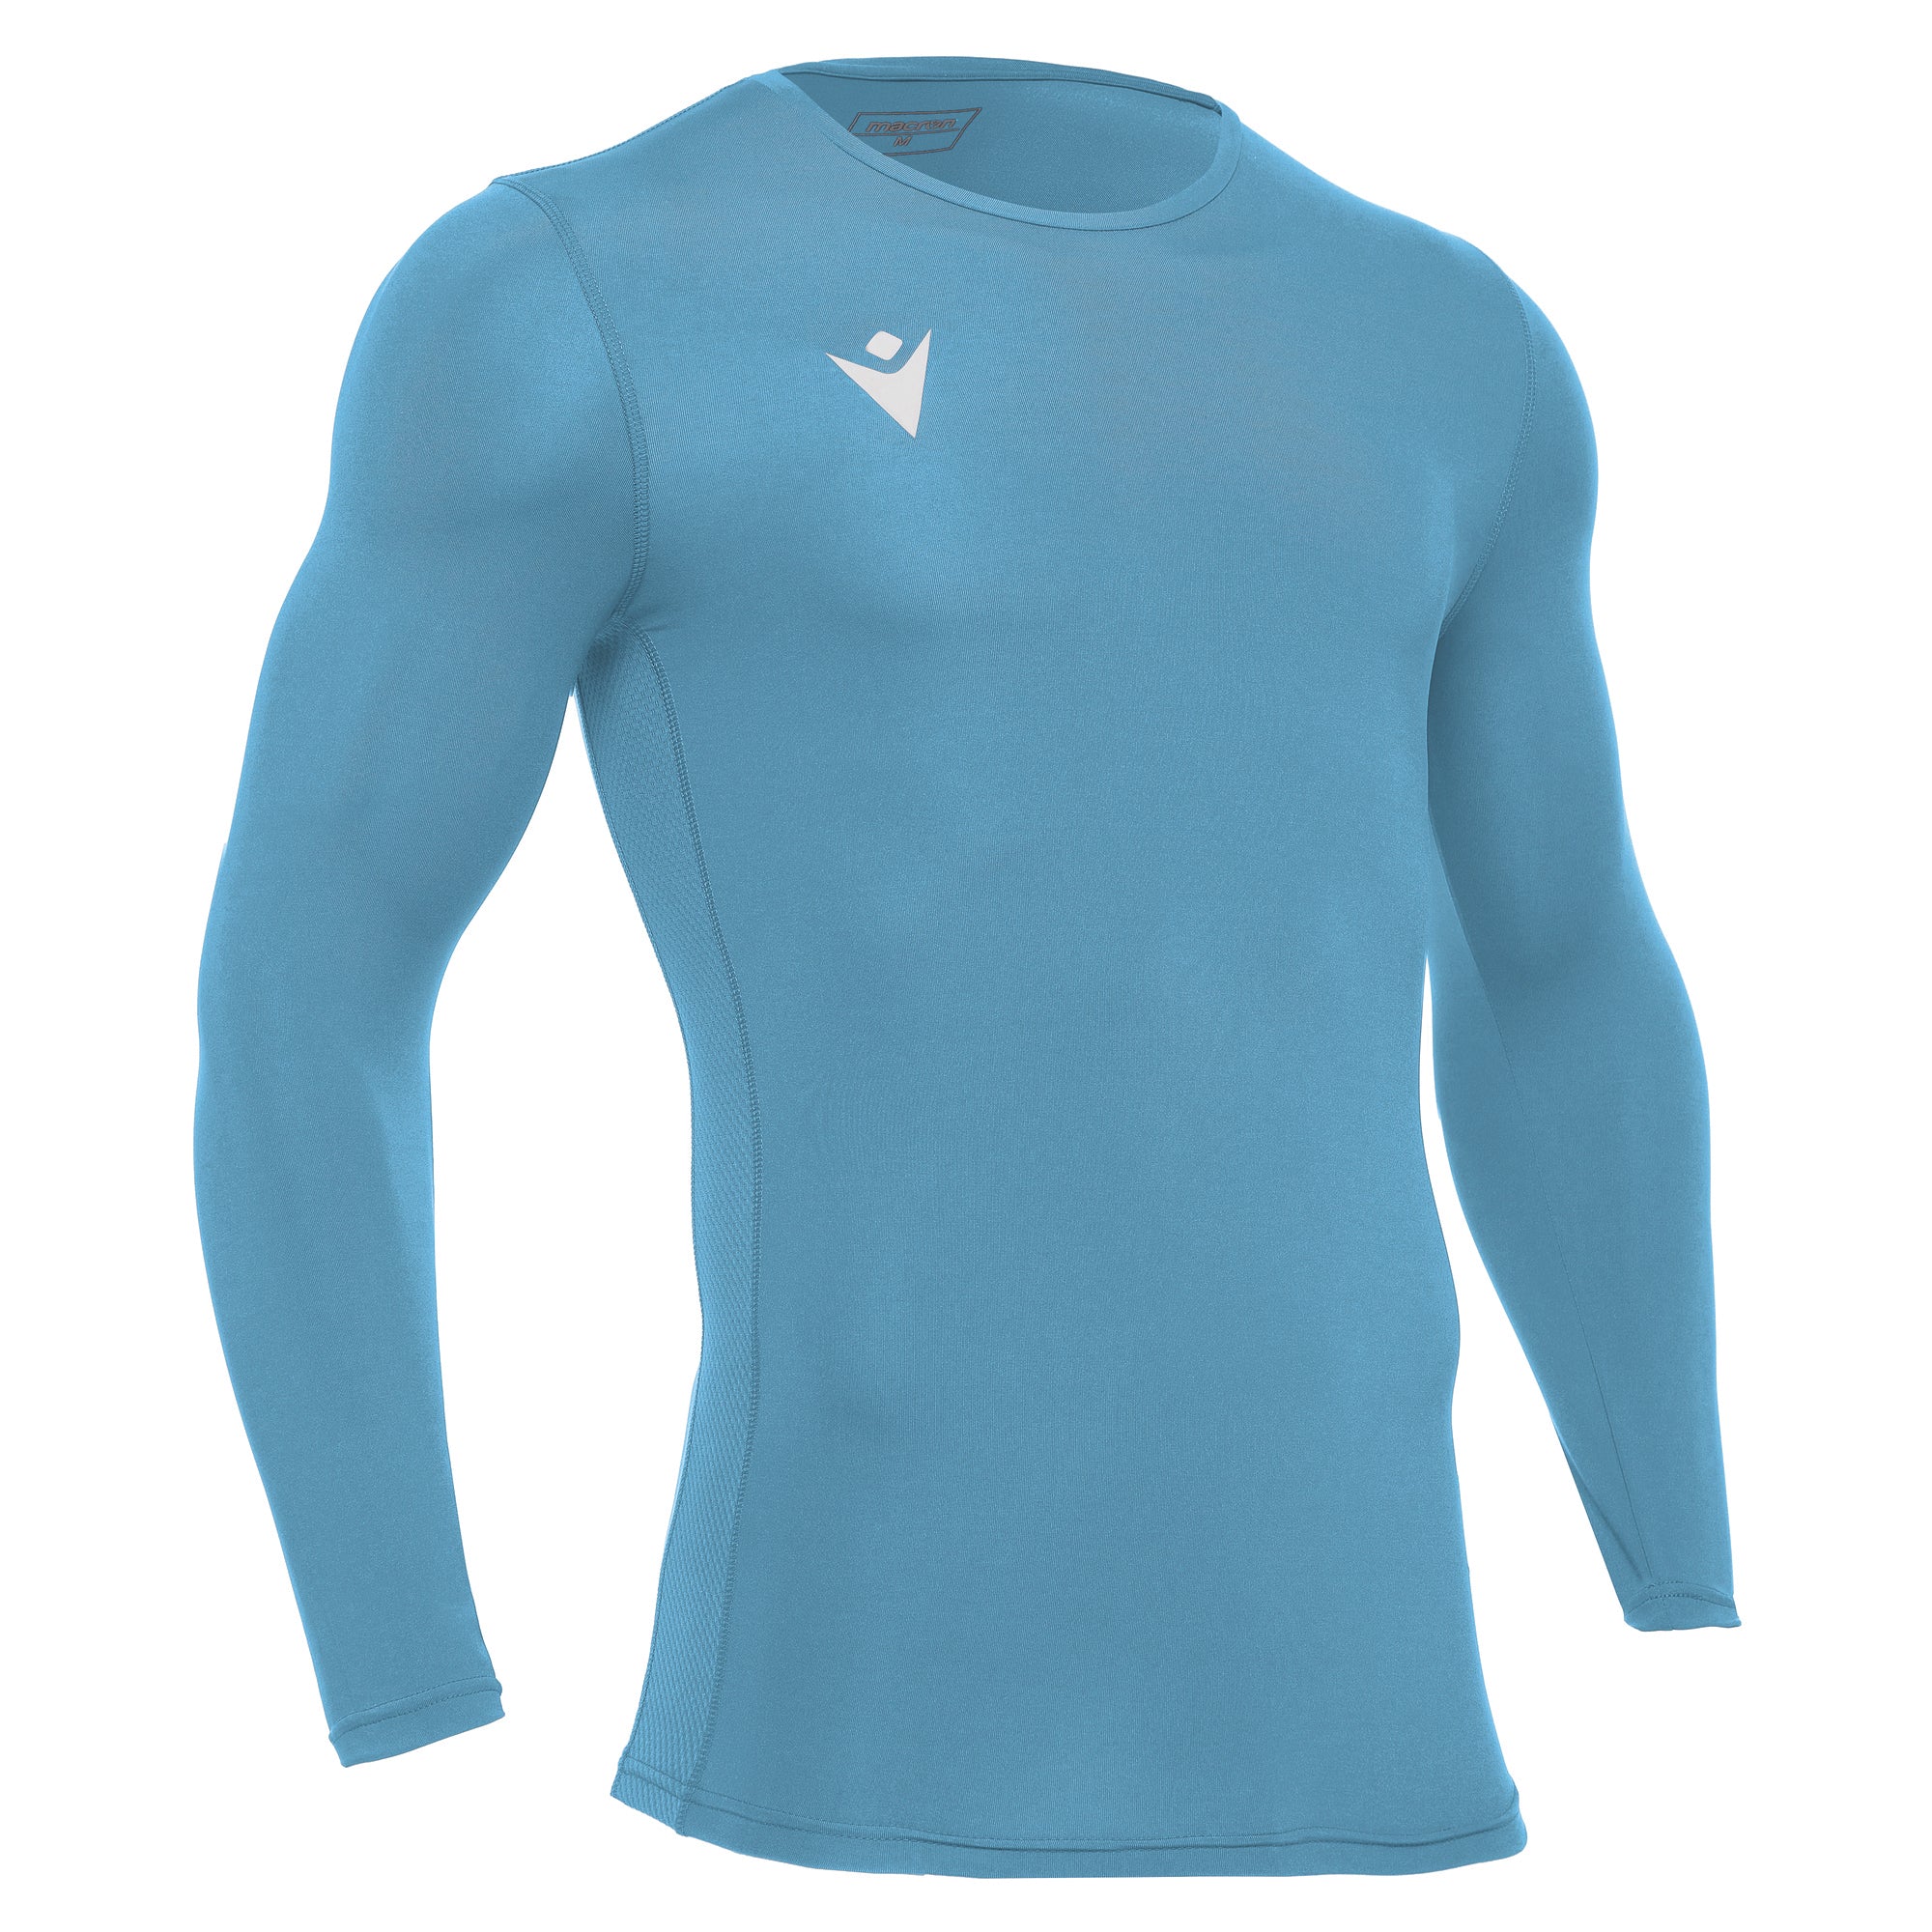 AUSC - HOLLY BASELAYER TOP